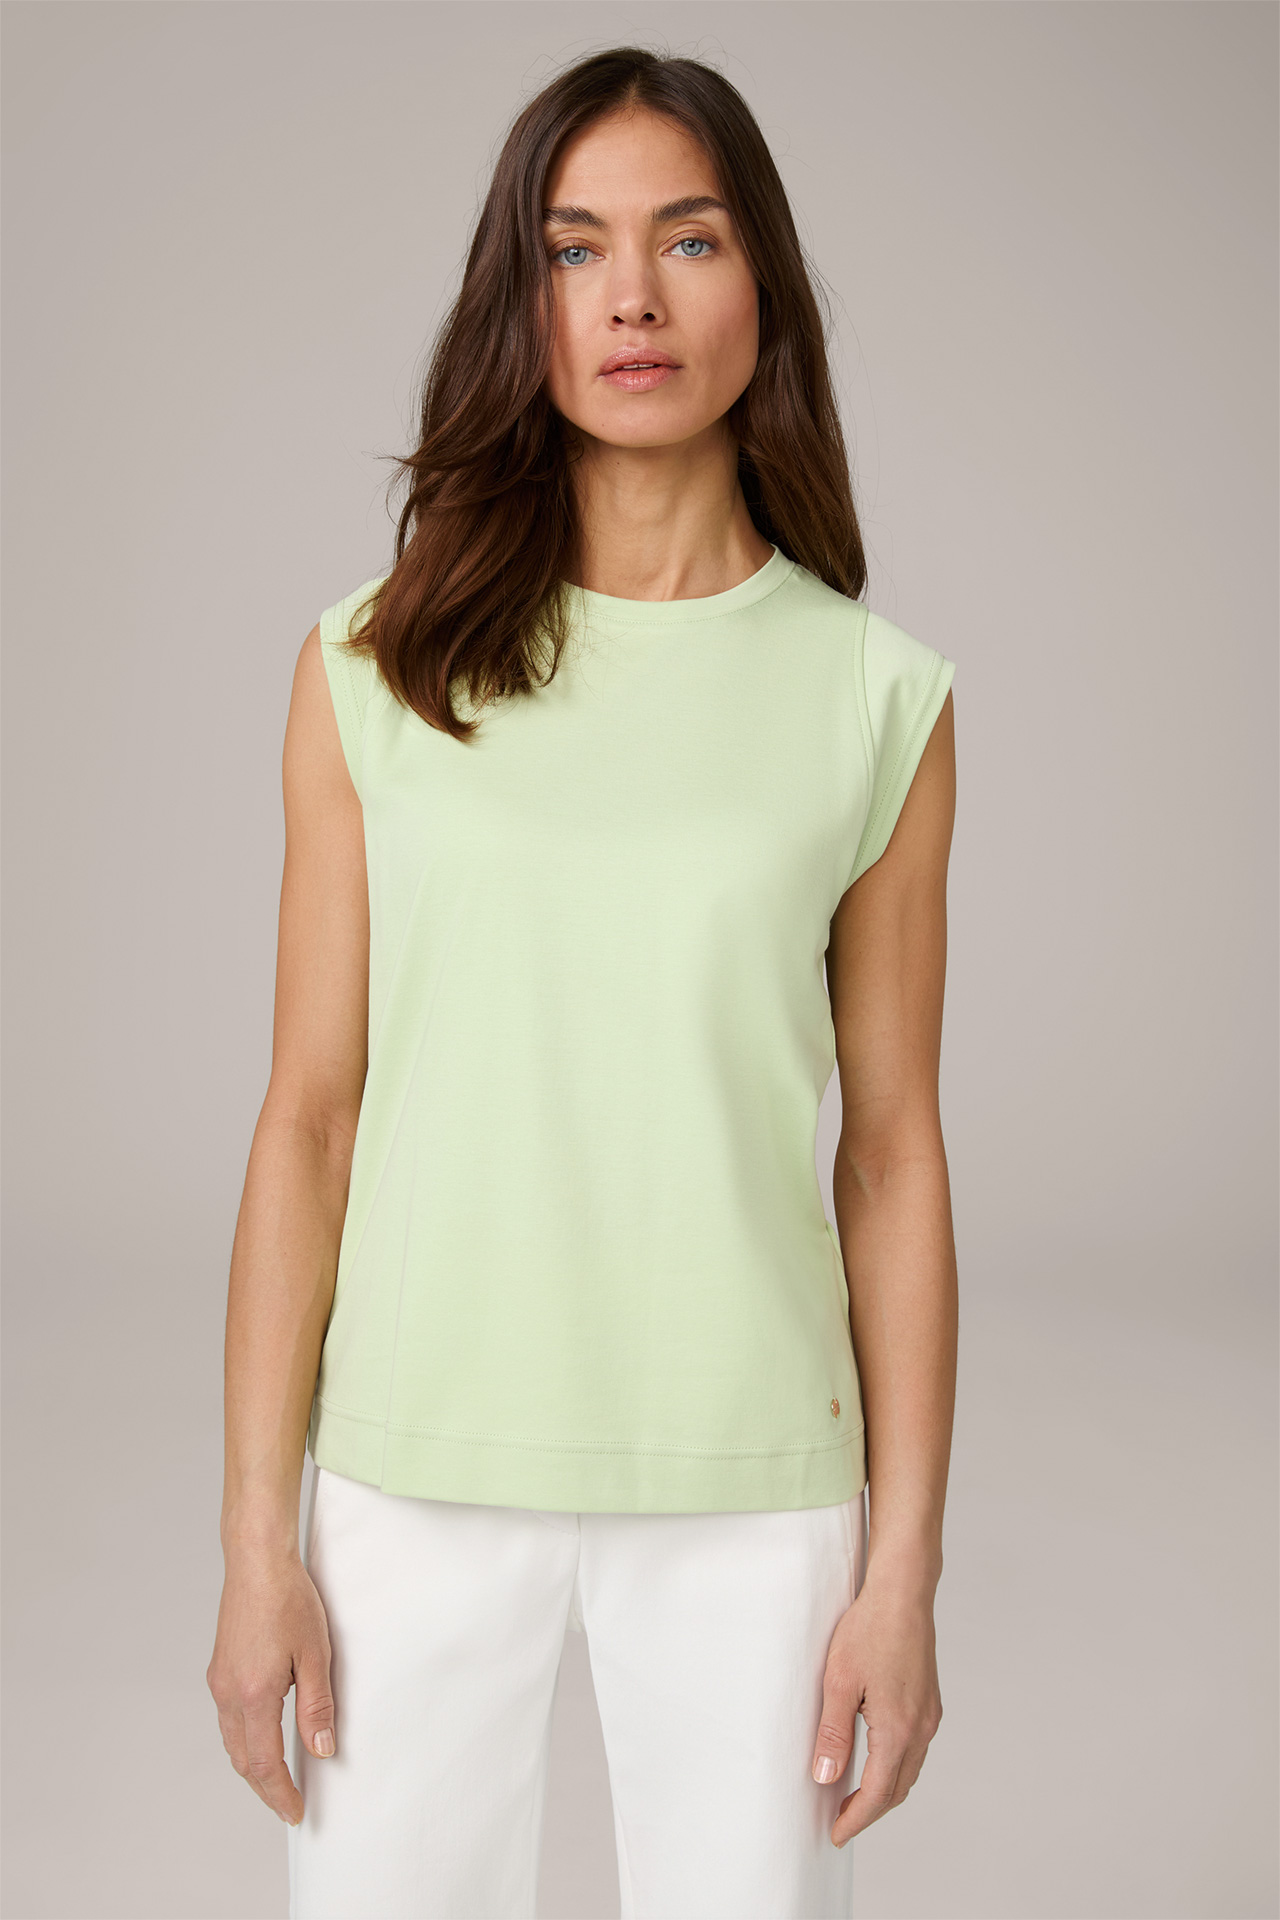 Cotton Interlock Shirt with Cap Sleeves in Light Green